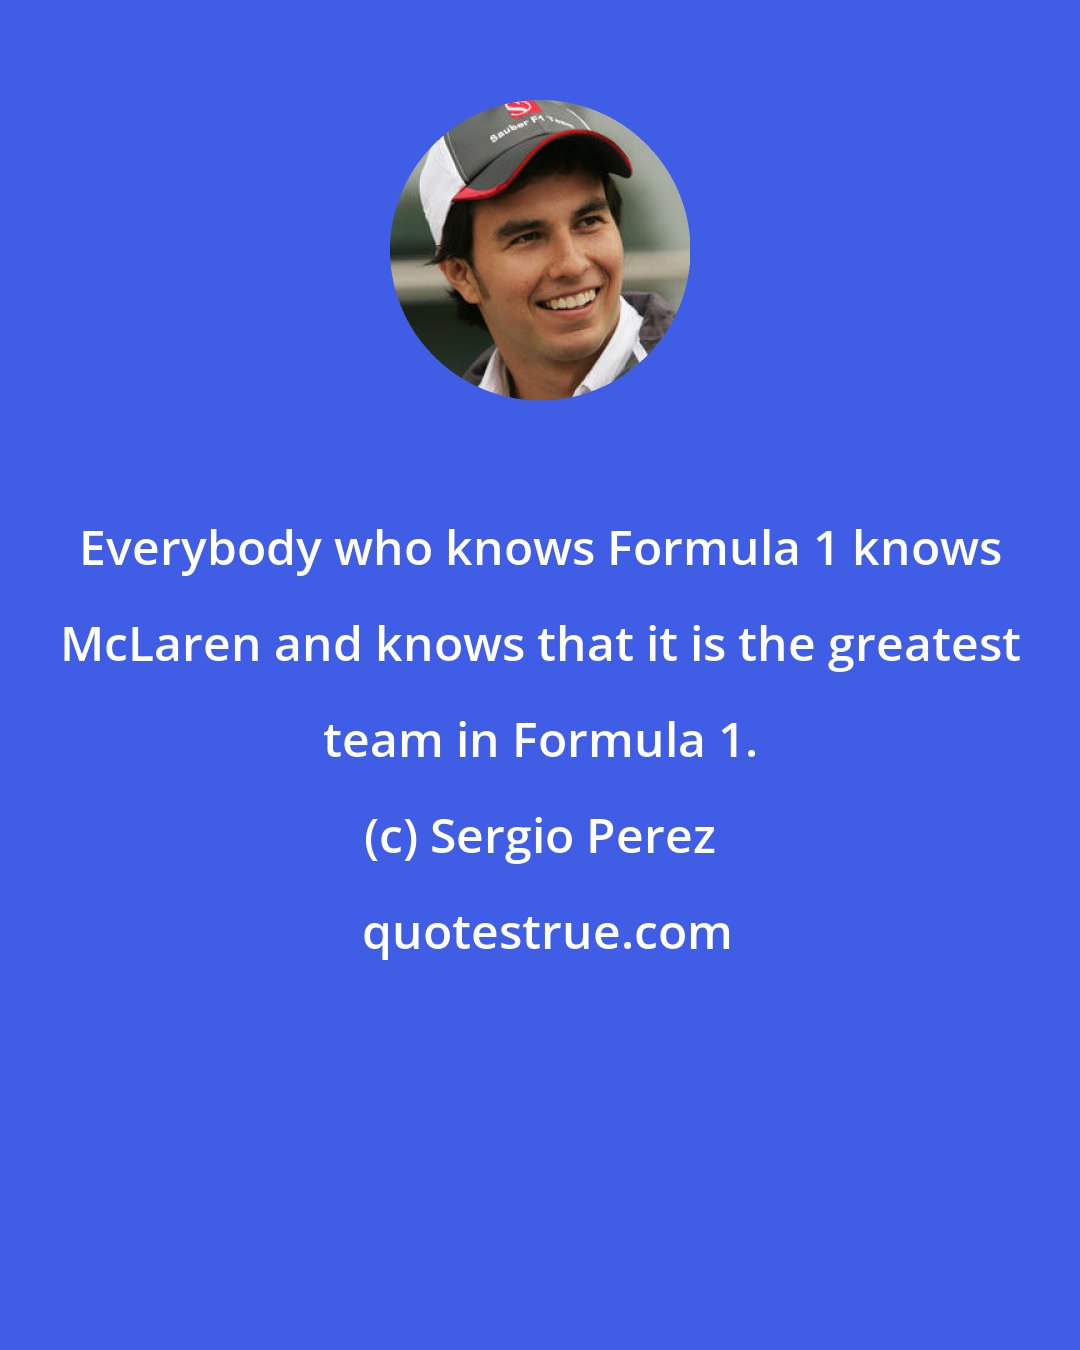 Sergio Perez: Everybody who knows Formula 1 knows McLaren and knows that it is the greatest team in Formula 1.